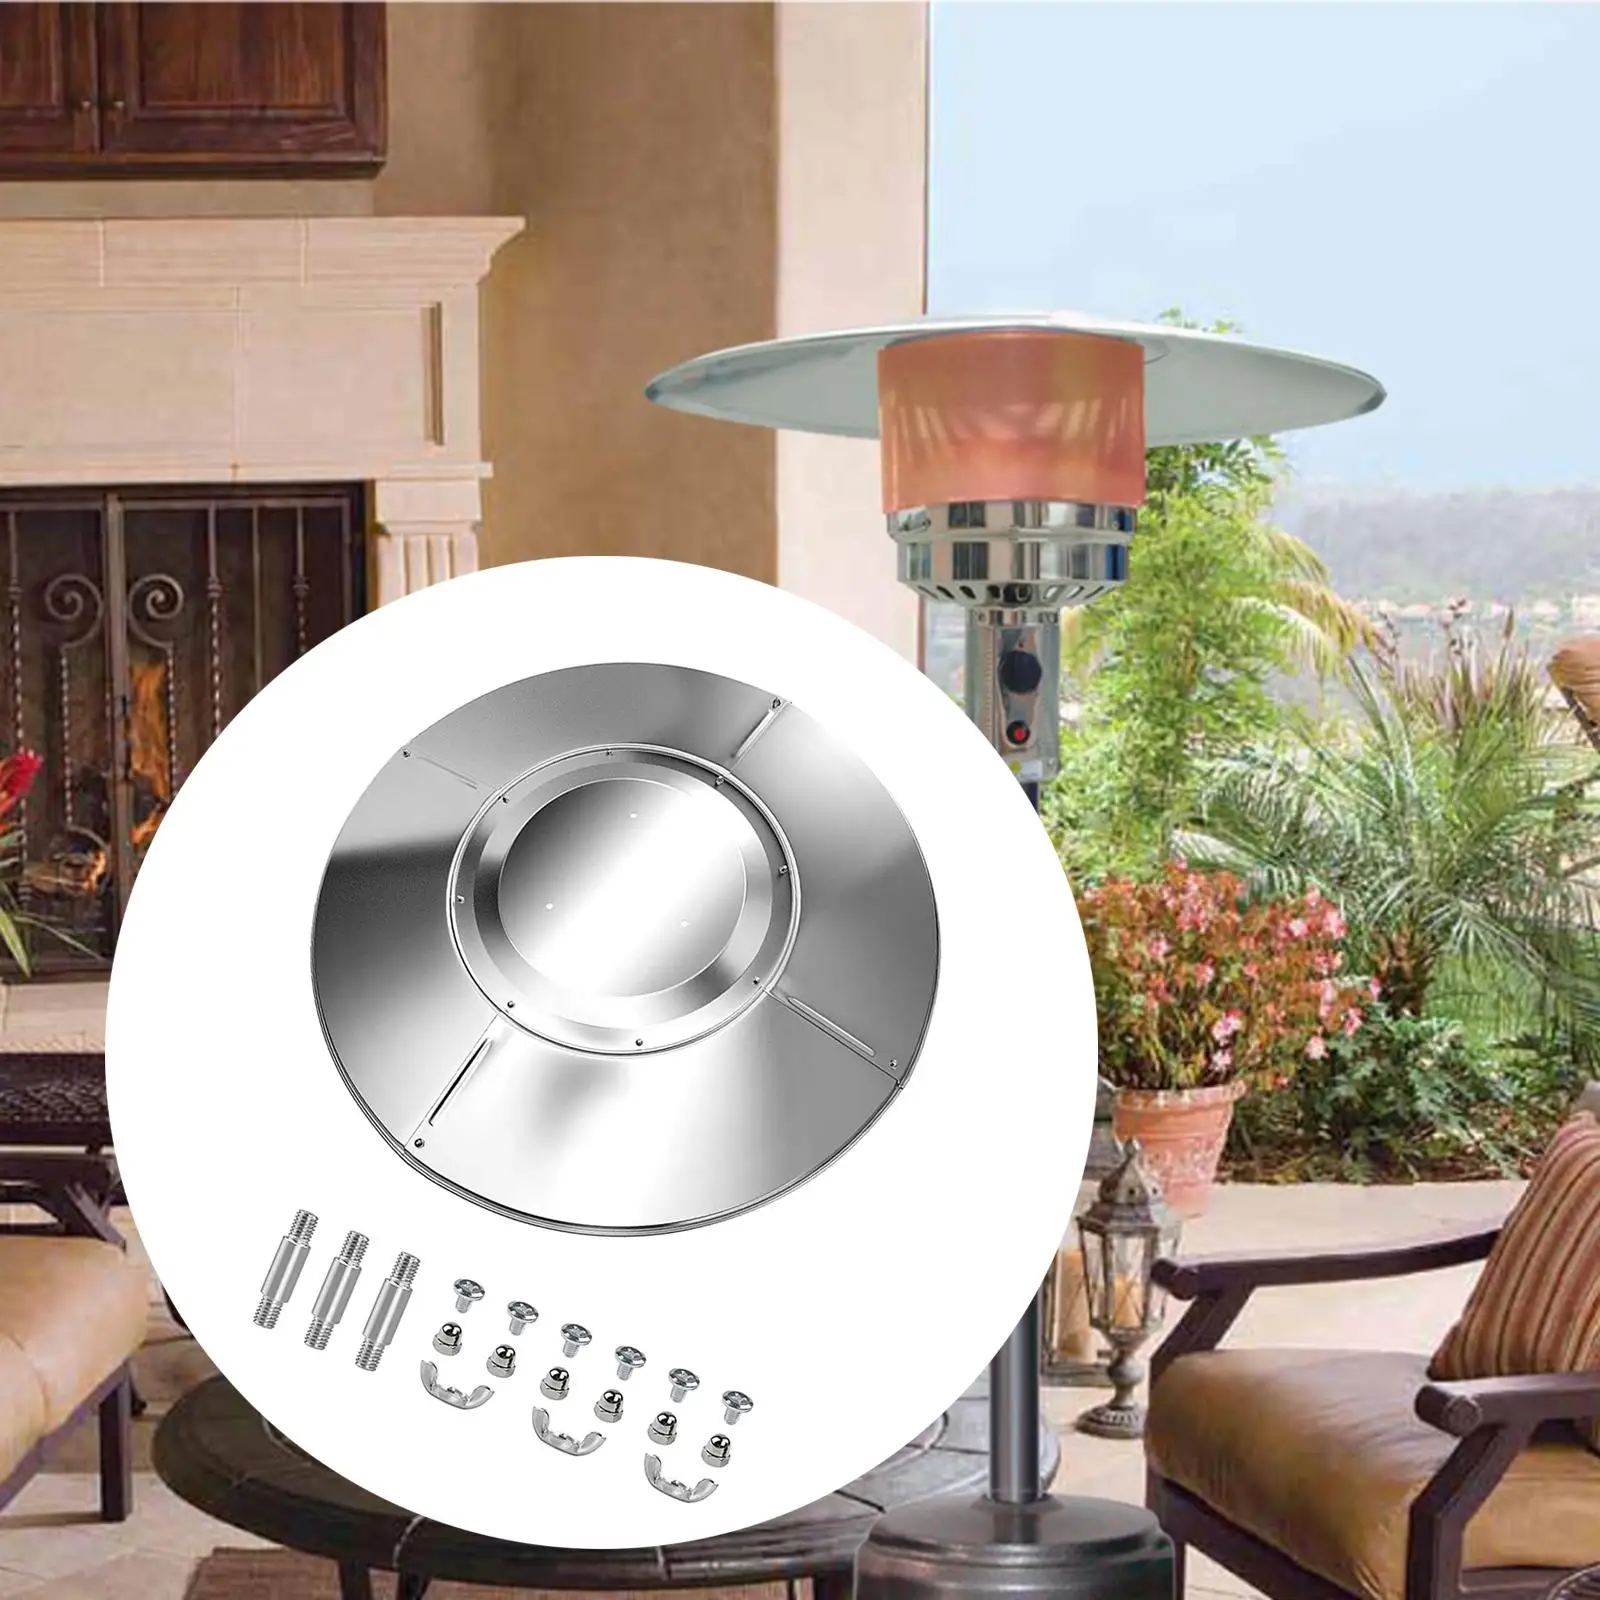 Outdoor Patio Heater Reflector Cover Windshield Outdoor Use Durable High Performance Dome Replacement Parts for Outdoor Heaters